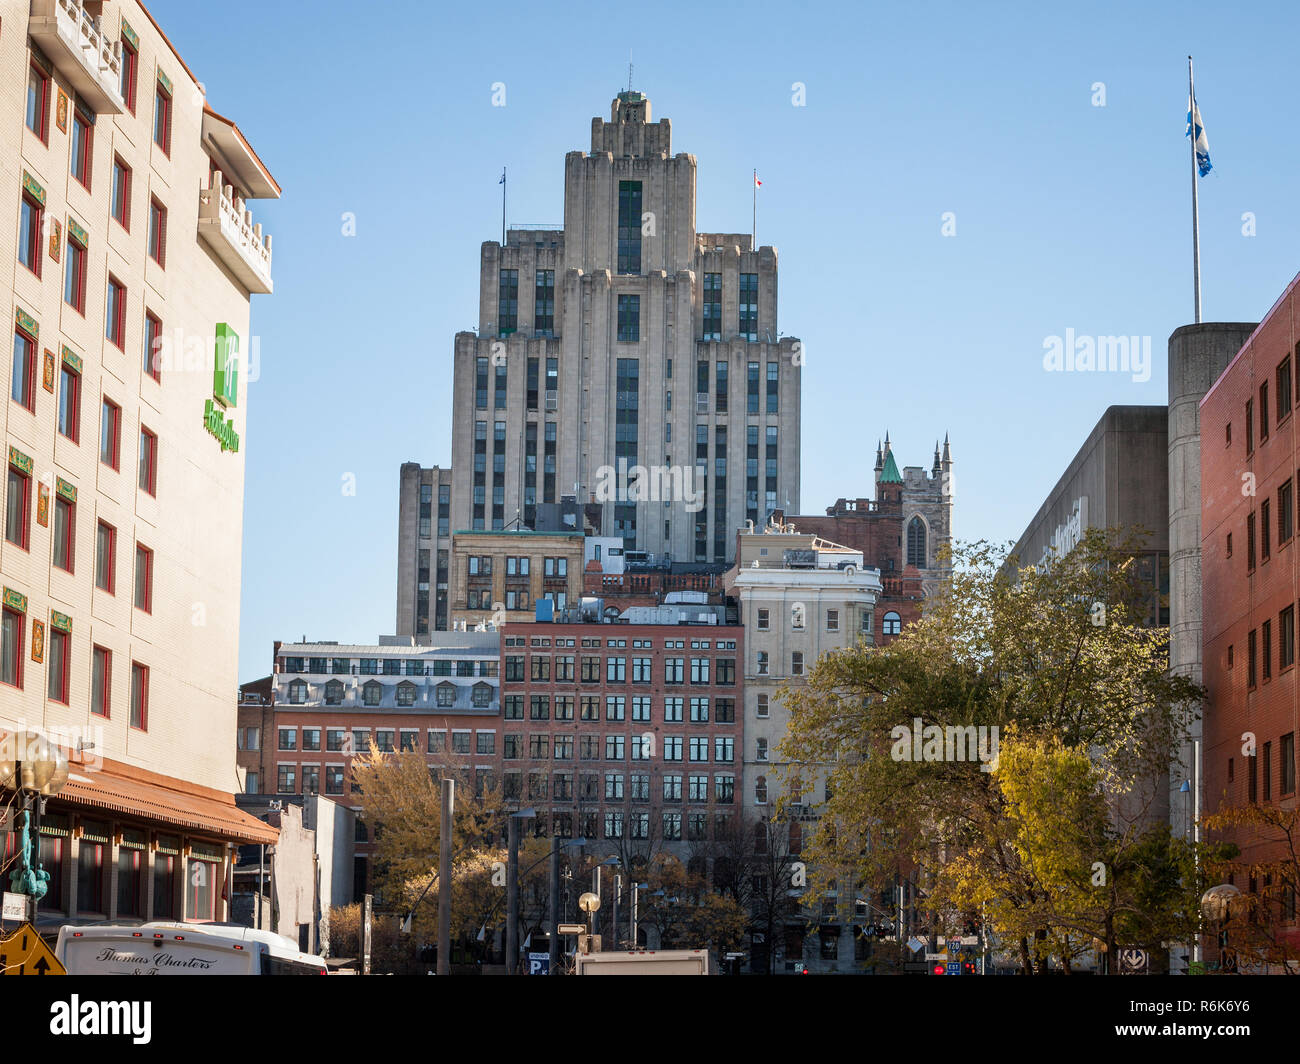 MONTREAL, CANADA - NOVEMBER 4, 2018: Aldred Building (aka La Prevoyance building) seen from the bottom in Old Montreal, Quebec. It is one of the main  Stock Photo